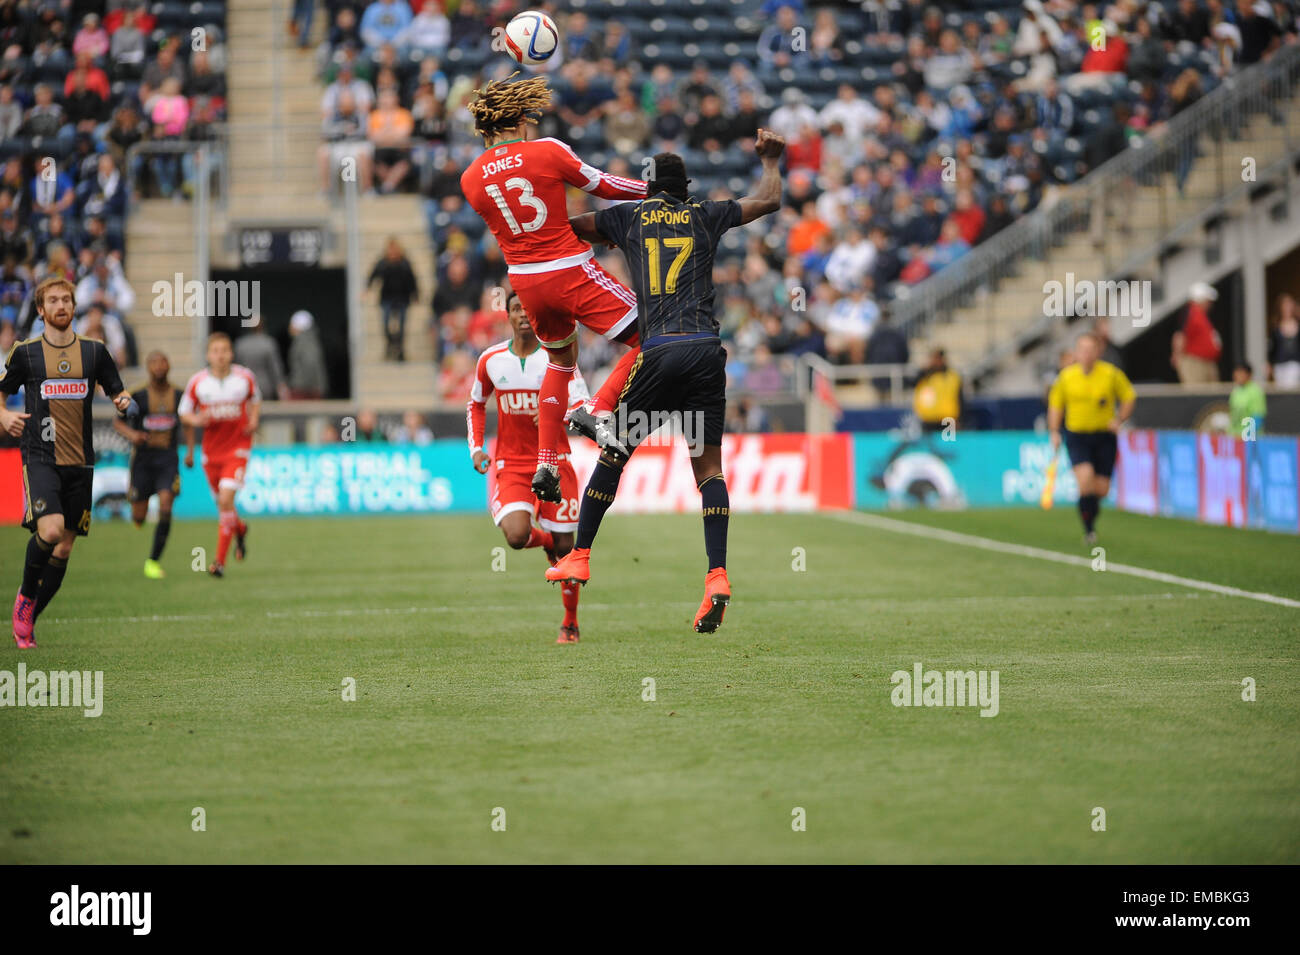 Chester, Pennsylvania, USA. 19th Apr, 2015. New England Revolution's midfielder, JERMAINE JONES (13) goes for a header against the Union's CJ SAPONG (17) The Revolution beat the Union 2-1 at PPL Park in Chester Pa Credit:  Ricky Fitchett/ZUMA Wire/Alamy Live News Stock Photo